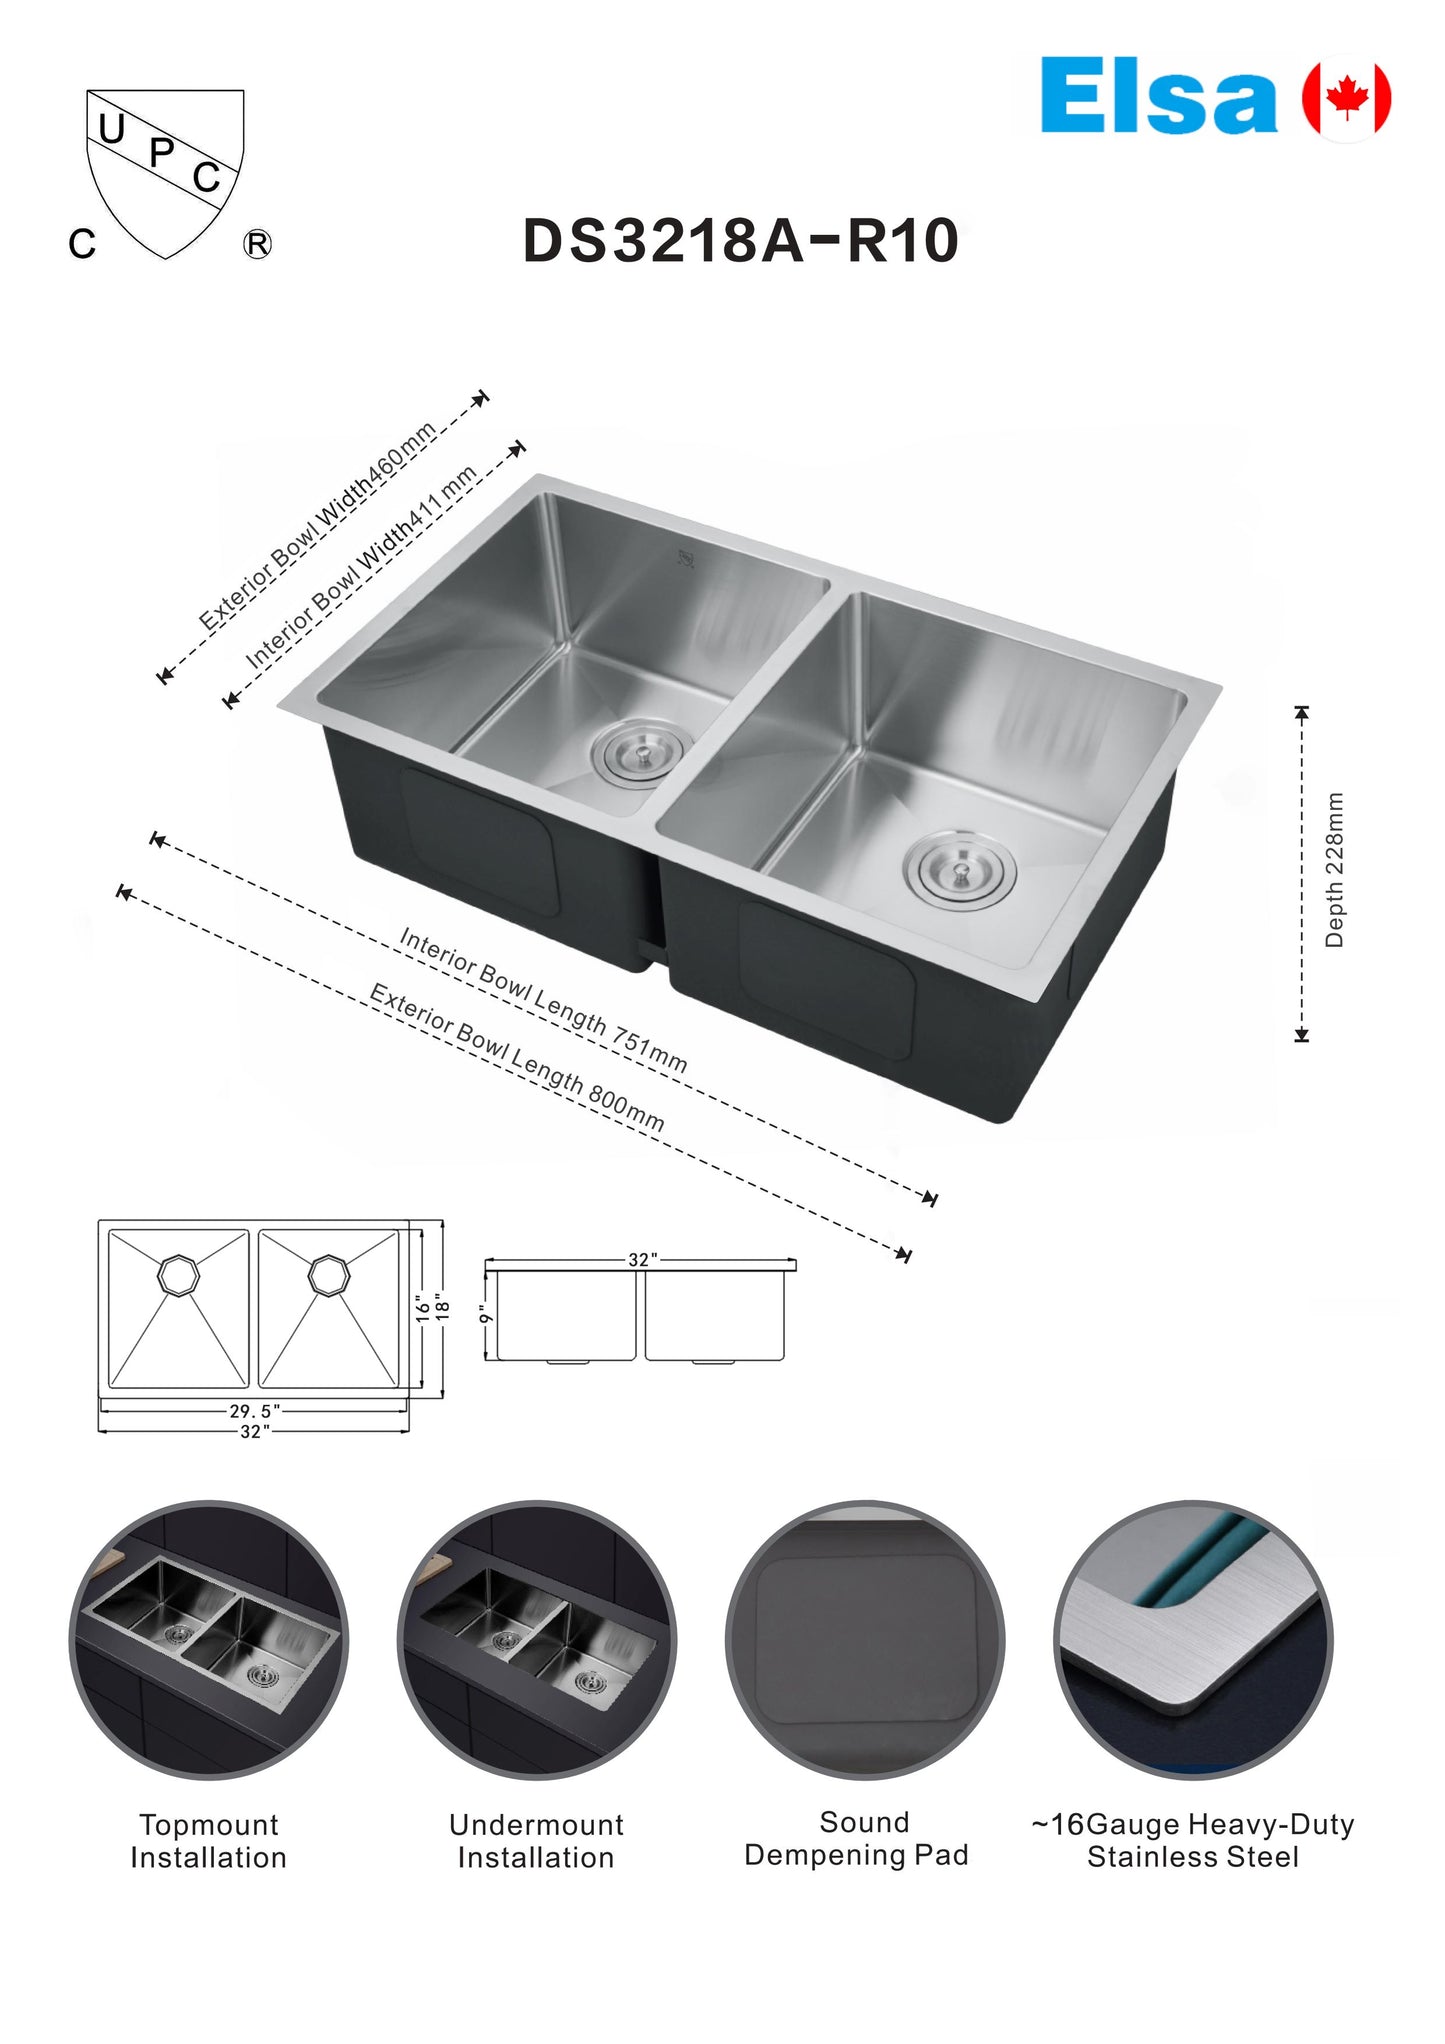 *PROMOTION* DS3218a-R10  handmade kitchen sink undermount double bowl 16 gauged (drains not included)800x460x228mm (31-1/2"x18"x9") inside 29-1/2"x16.18"x9" $119/PC